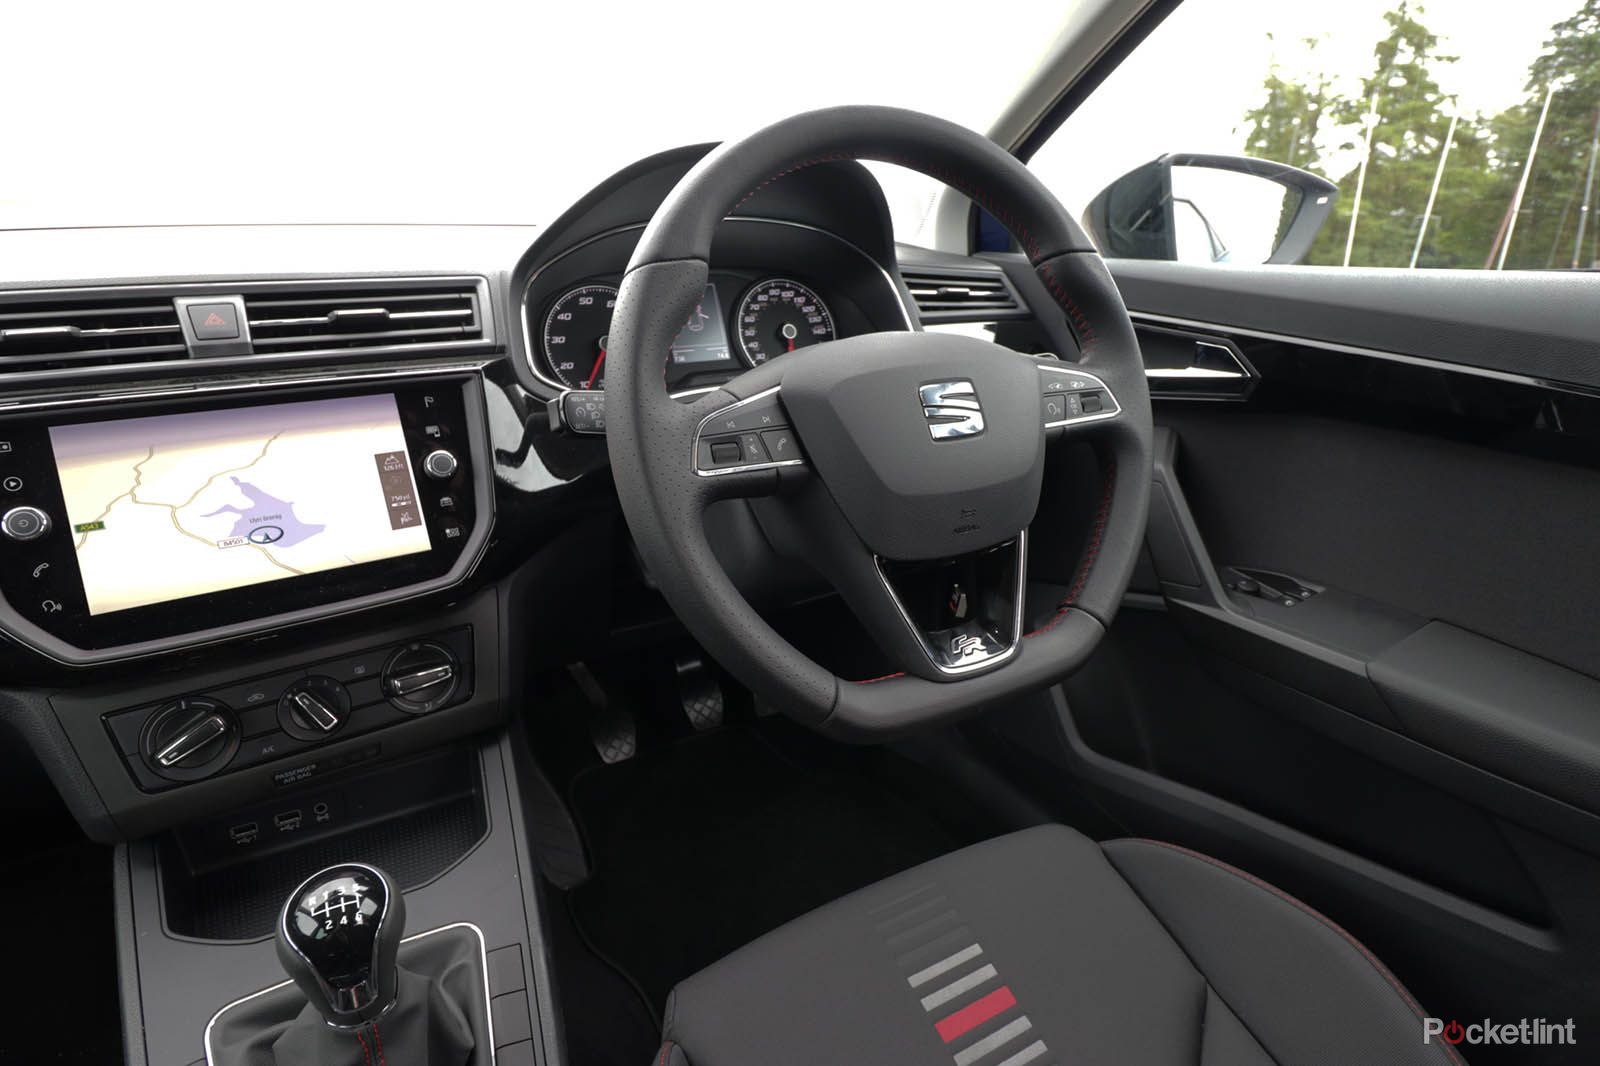 2021 Seat Ibiza Facelift Revealed With A New Interior And A Sharper  Infotainment System